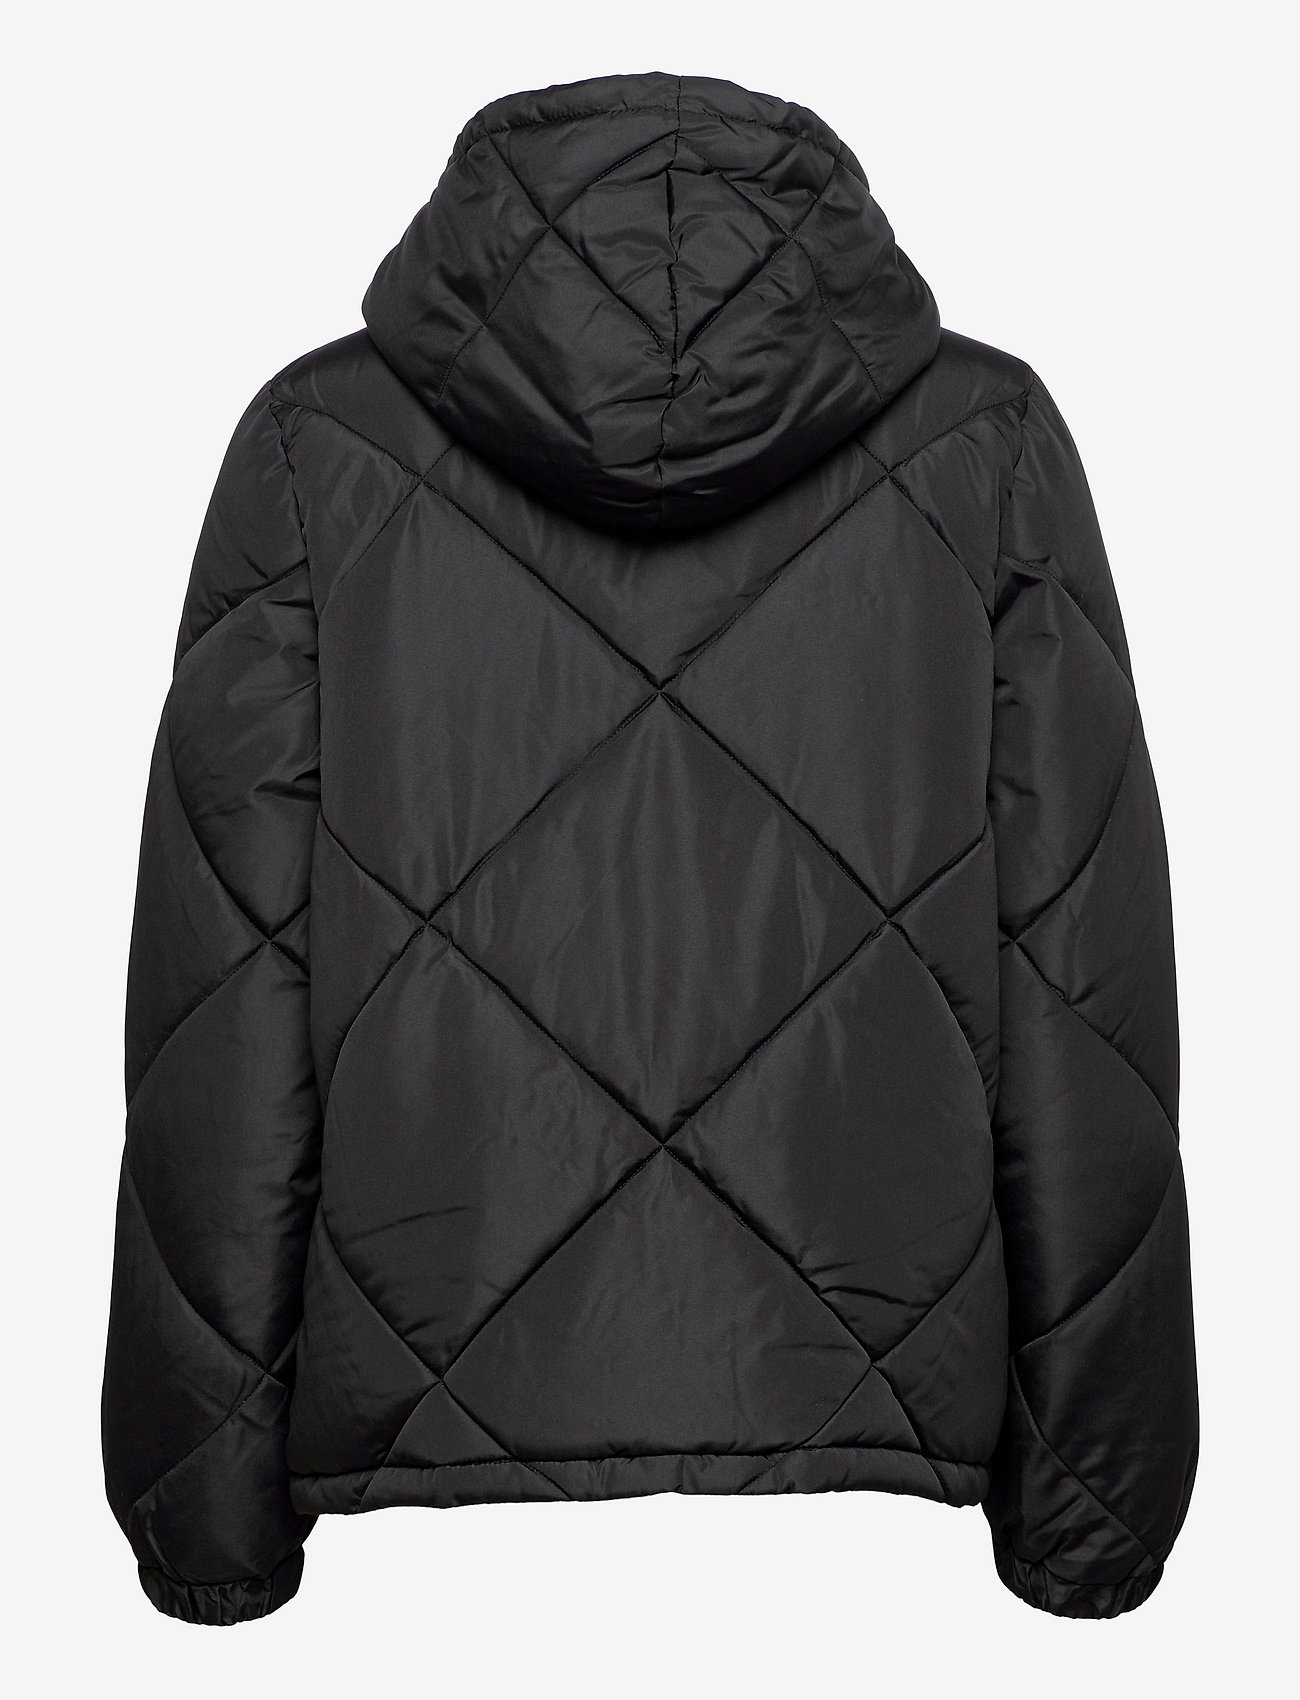 Selected Femme - SLFMONIKA PUFFER JACKET - quilted jackets - black - 1